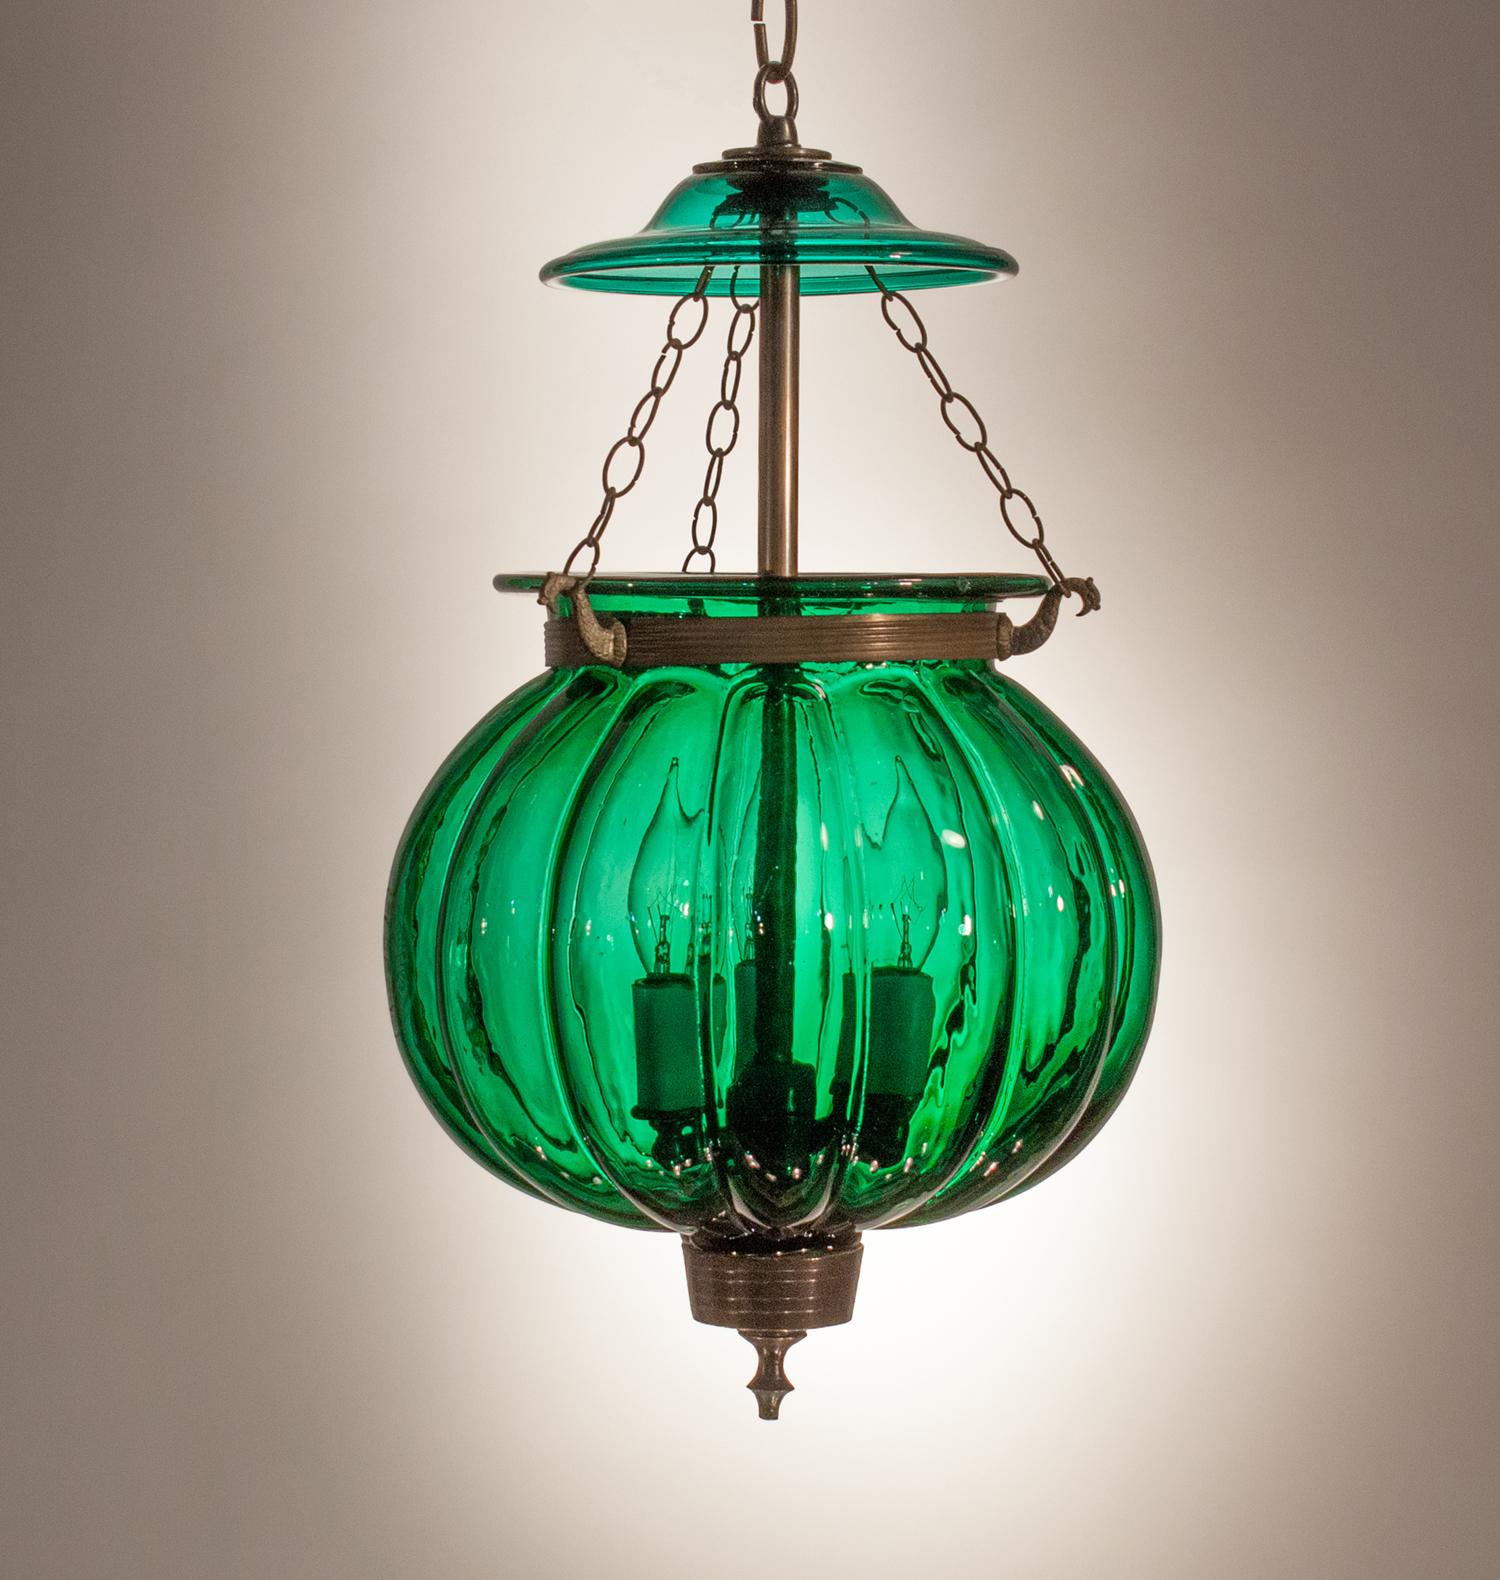 An emerald gem in our bell jar collection, this circa 1890 pumpkin- or melon-shaped lantern is in excellent condition for its age, with desirable air bubbles and swirls in the hand blown glass. The bell jar has its original brass finial and chains.